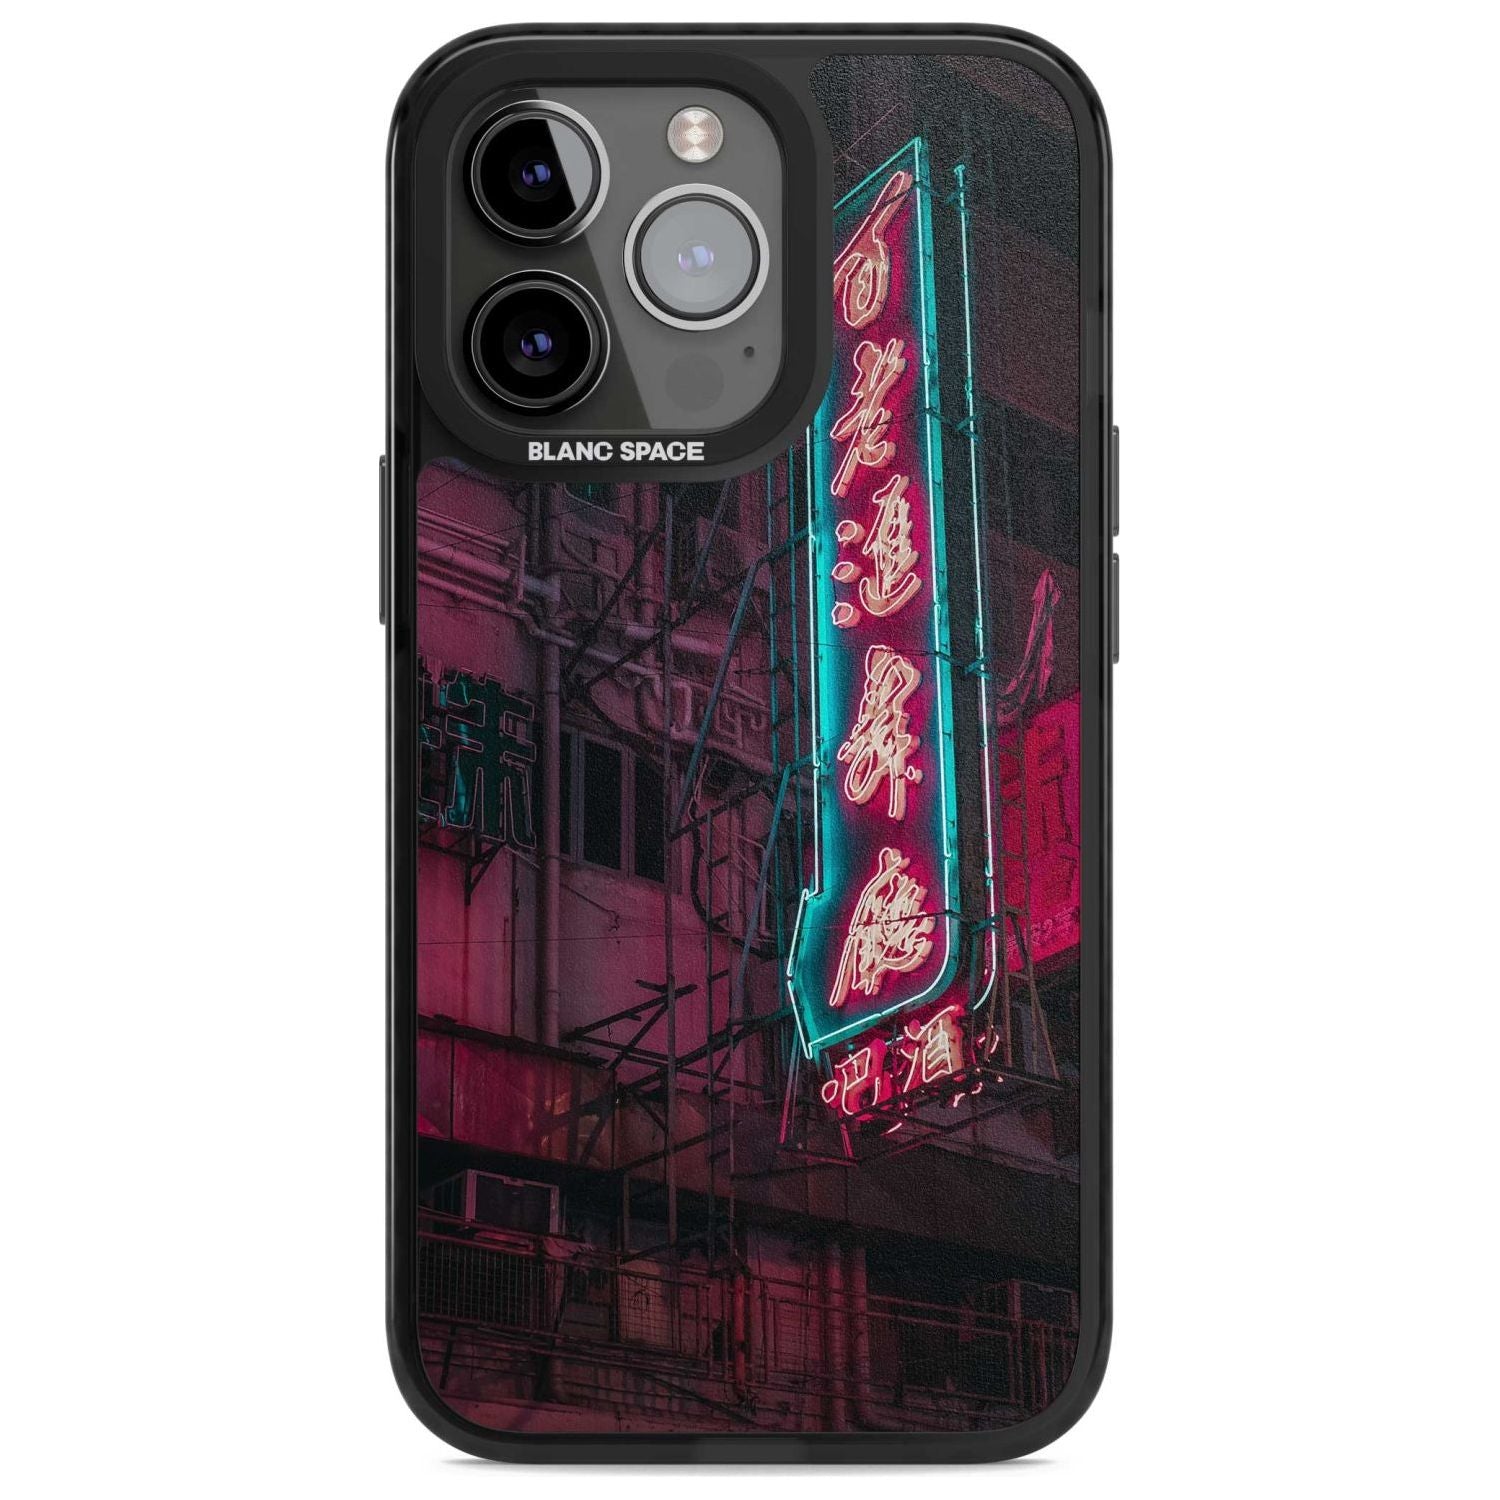 Large Kanji Sign - Neon Cities Photographs Phone Case iPhone 15 Pro Max / Magsafe Black Impact Case,iPhone 15 Pro / Magsafe Black Impact Case,iPhone 14 Pro Max / Magsafe Black Impact Case,iPhone 14 Pro / Magsafe Black Impact Case,iPhone 13 Pro / Magsafe Black Impact Case Blanc Space